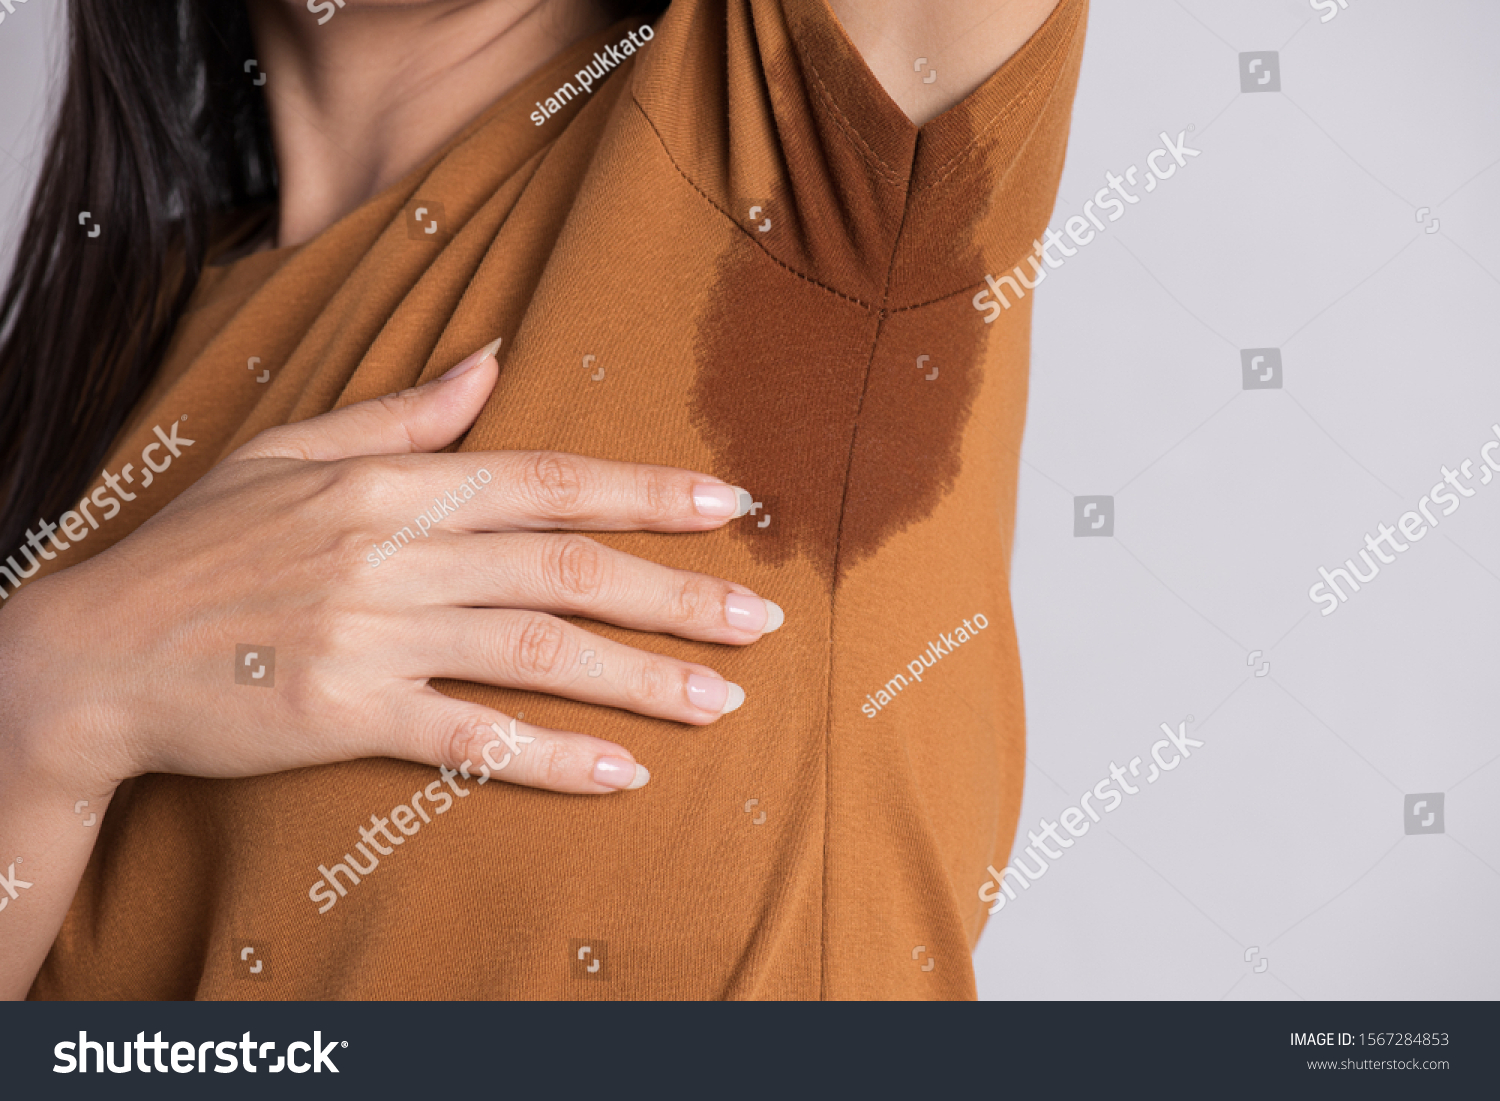 Close-up asian woman with hyperhidrosis sweating. Young asia woman with sweat stain on her clothes against grey background. Healthcare concept. #1567284853